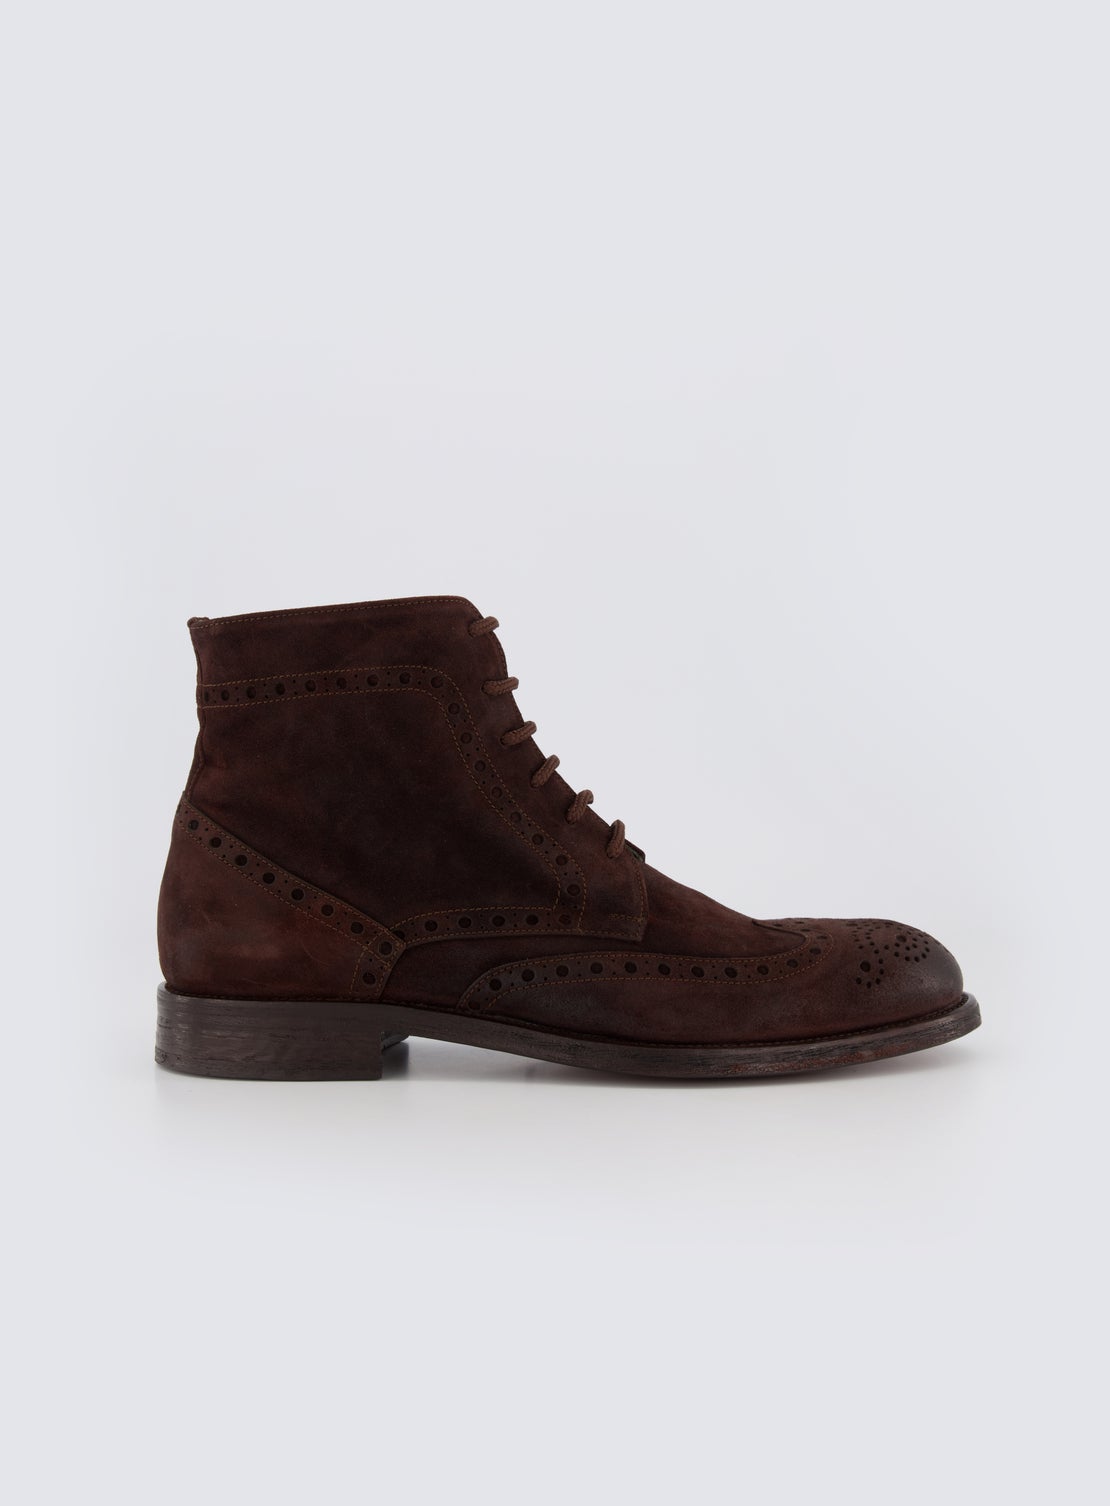 Johnson Brown Suede Lace Up Boot